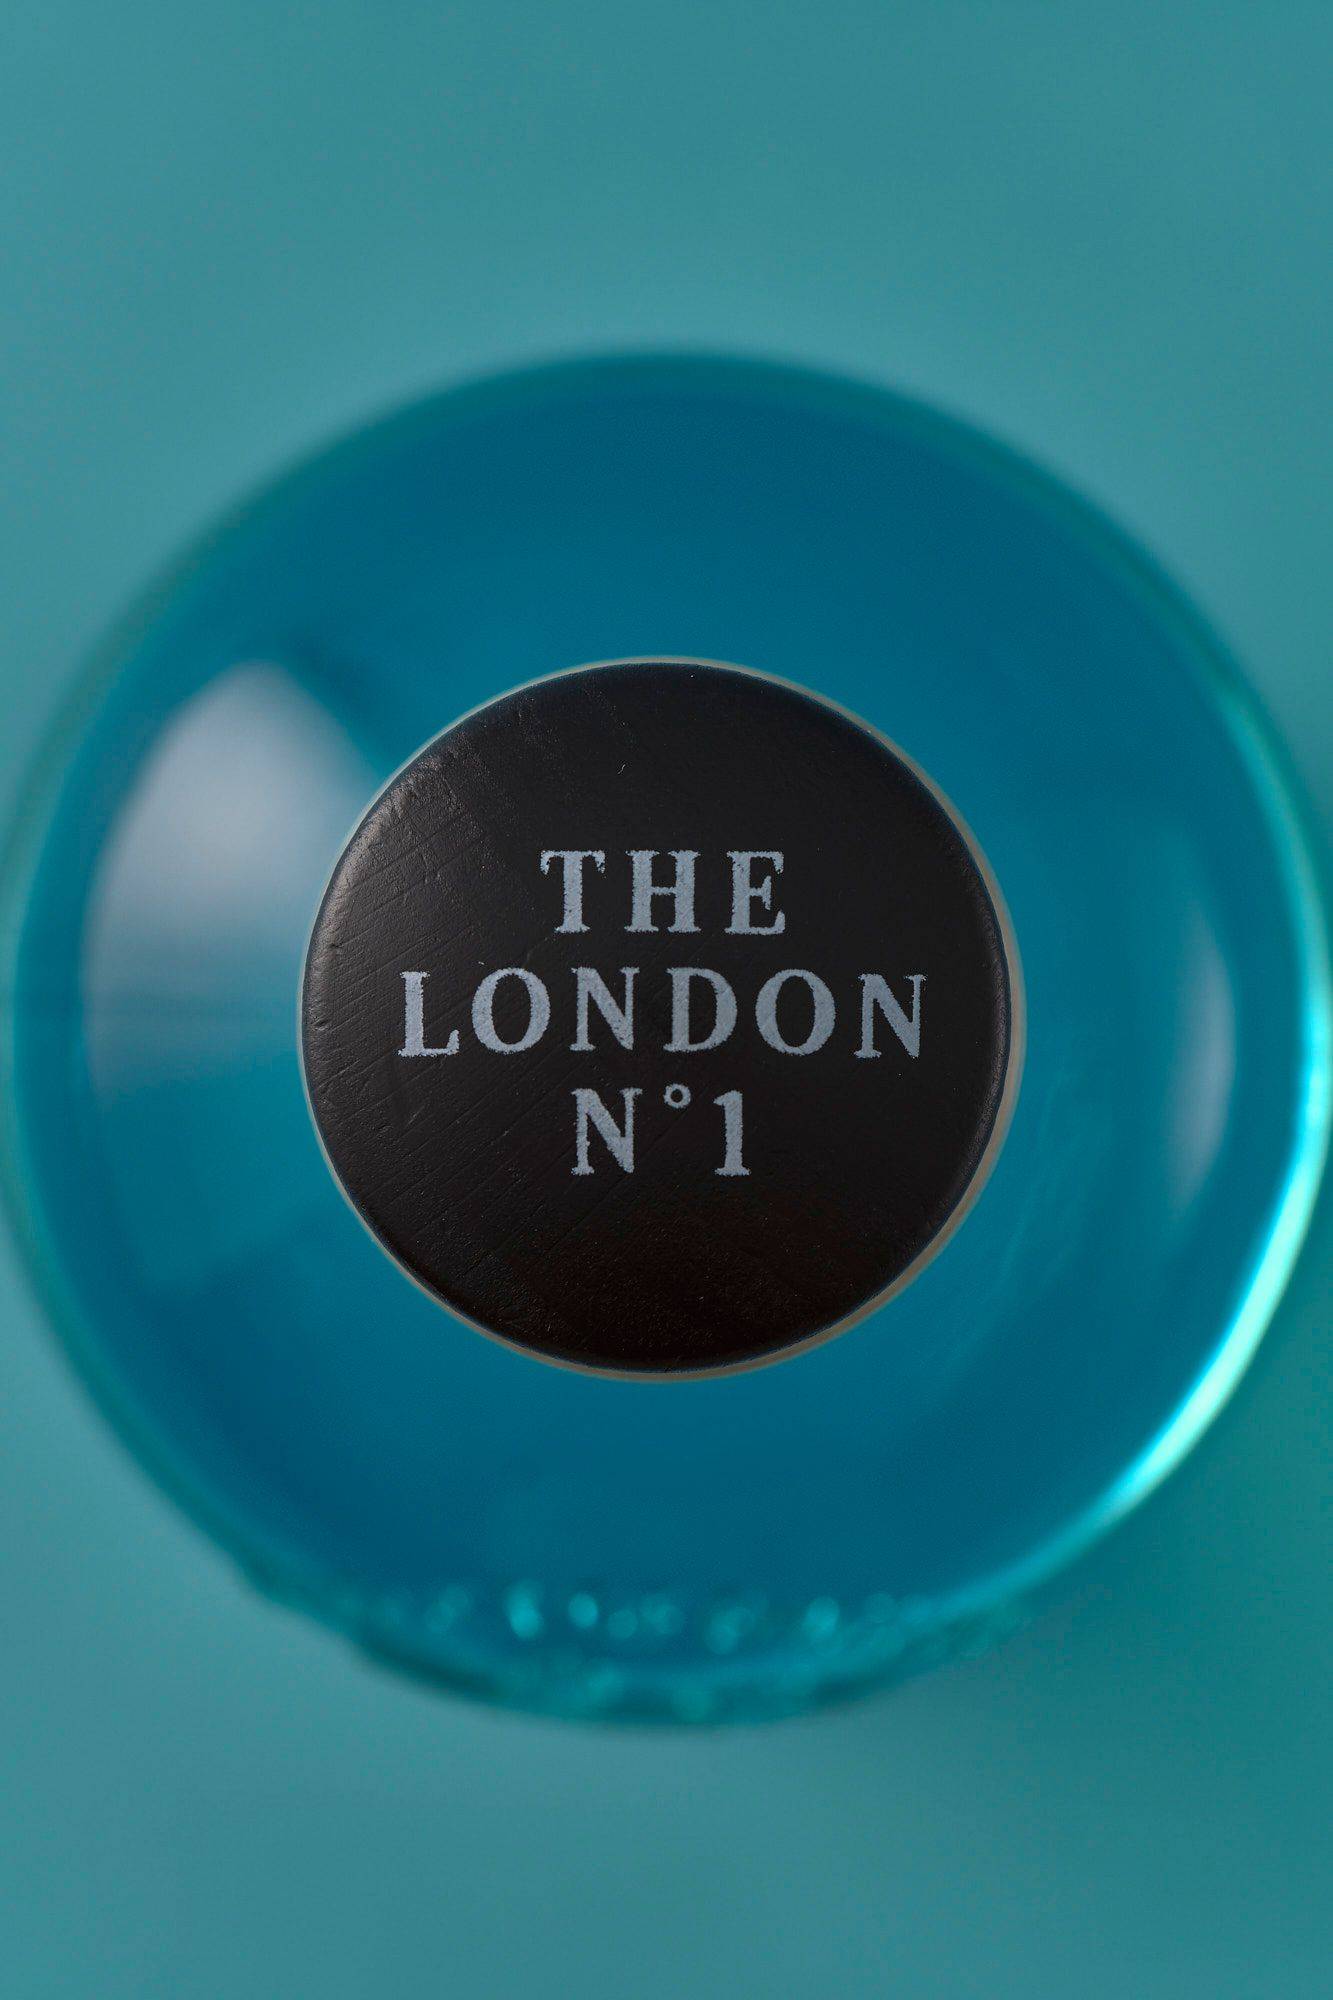 a bottle of the london number one gin on blue background